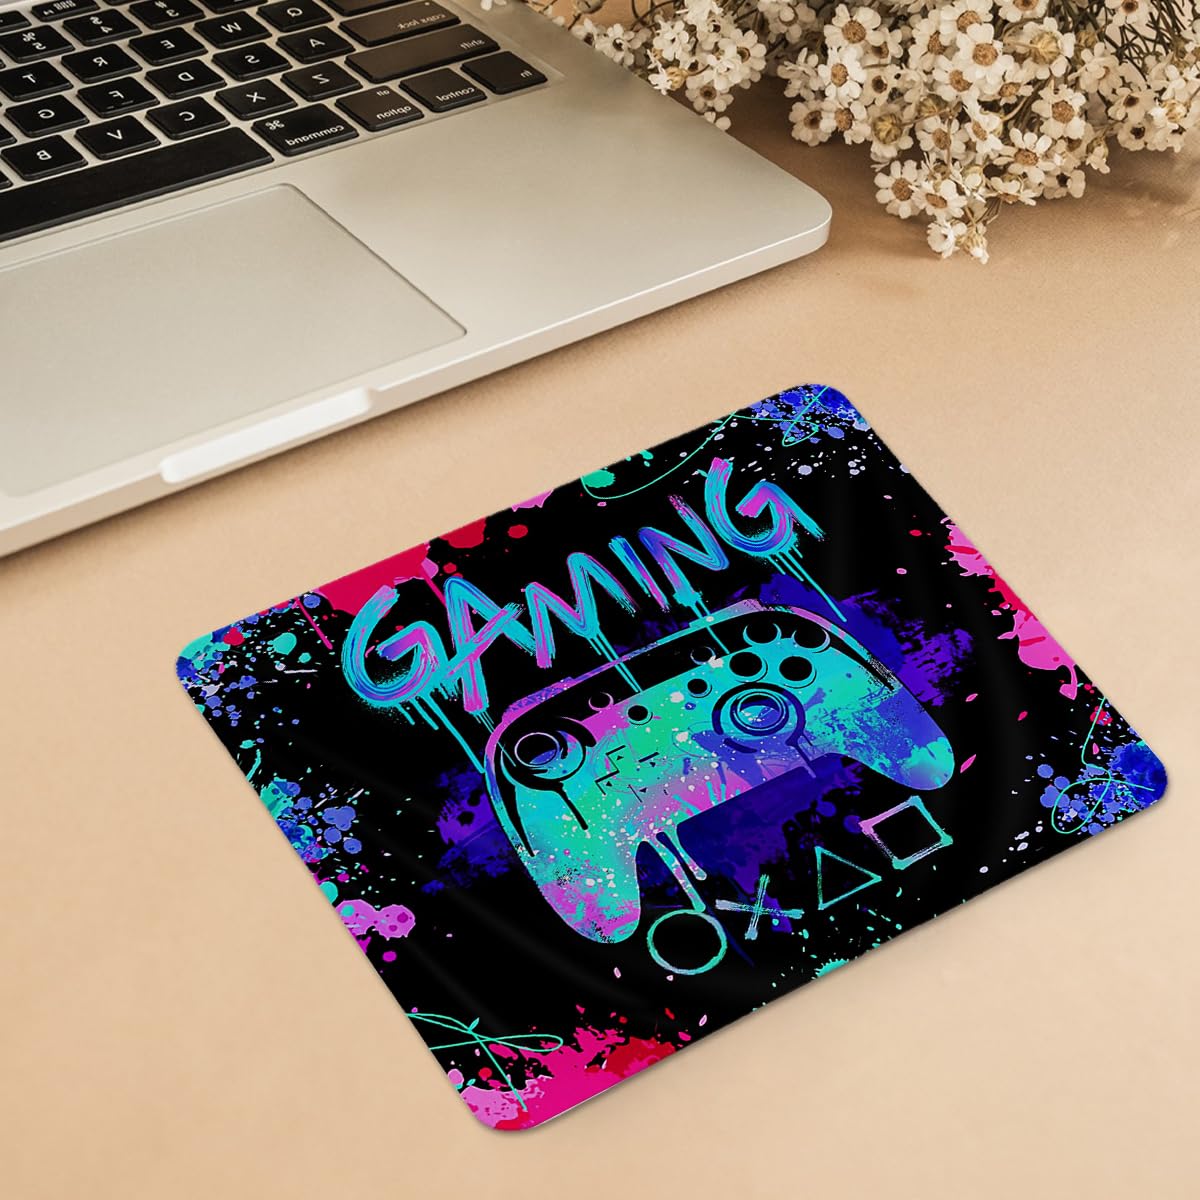 hold fizz Gamer Mouse Pad,Gaming Mouse Pad,Gaming Desk Accessories,Gaming Desk Decor,Gaming Room Decor,Boys Room Decor,Teenage Boy Room Decor,Mouse Pads for Desk,Square Mouse Pad 9.5x7.9 Inch - amzGamess